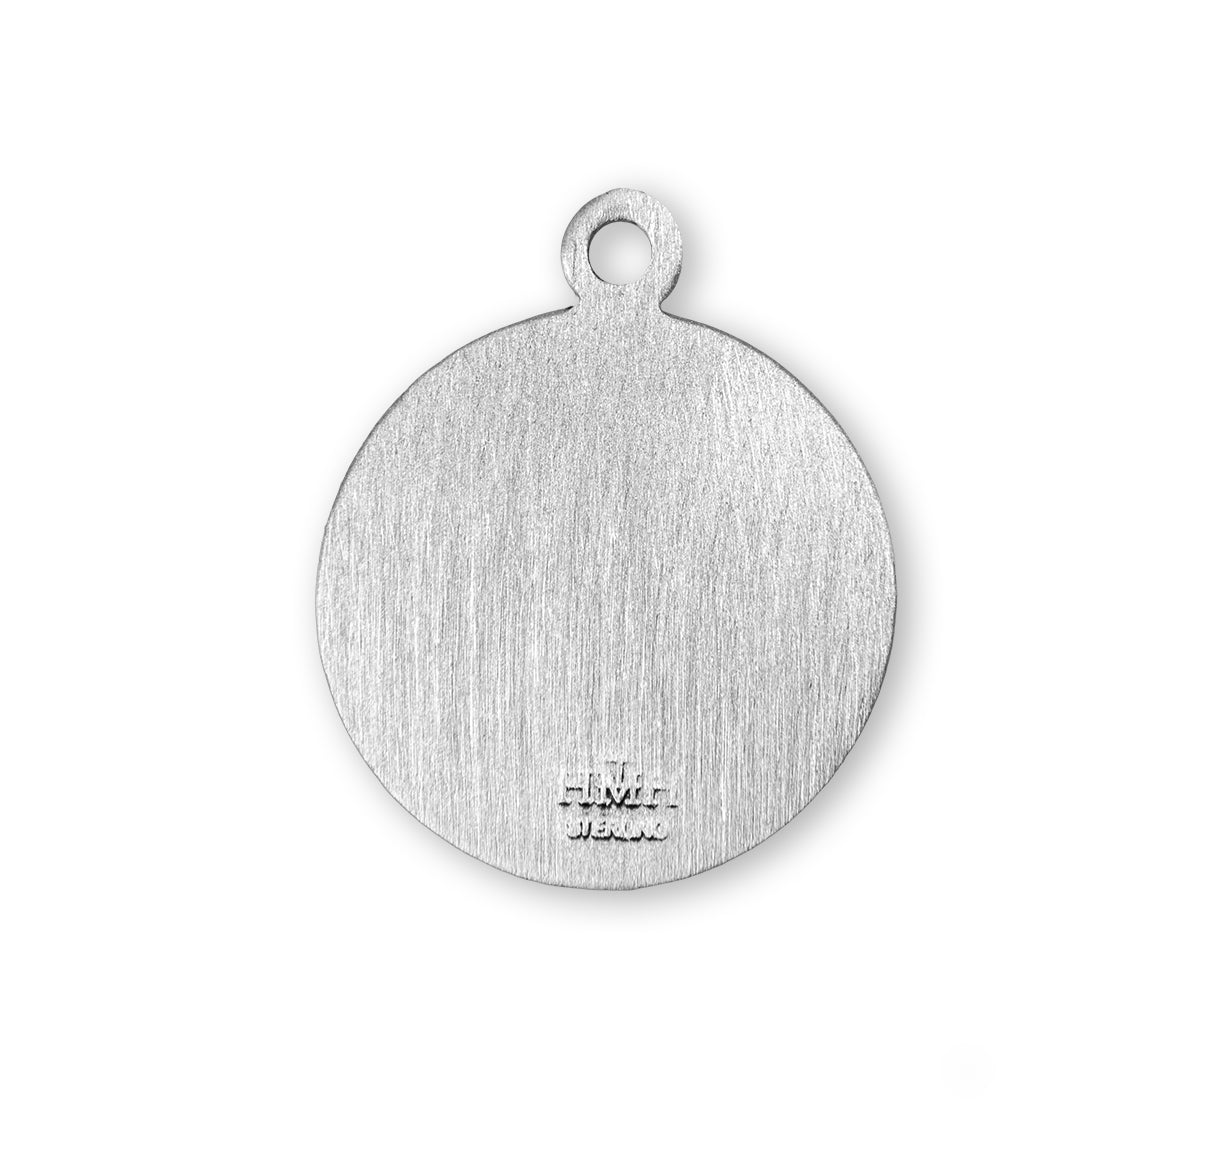 St. Thomas Aquinas Sterling Silver Medal Necklace